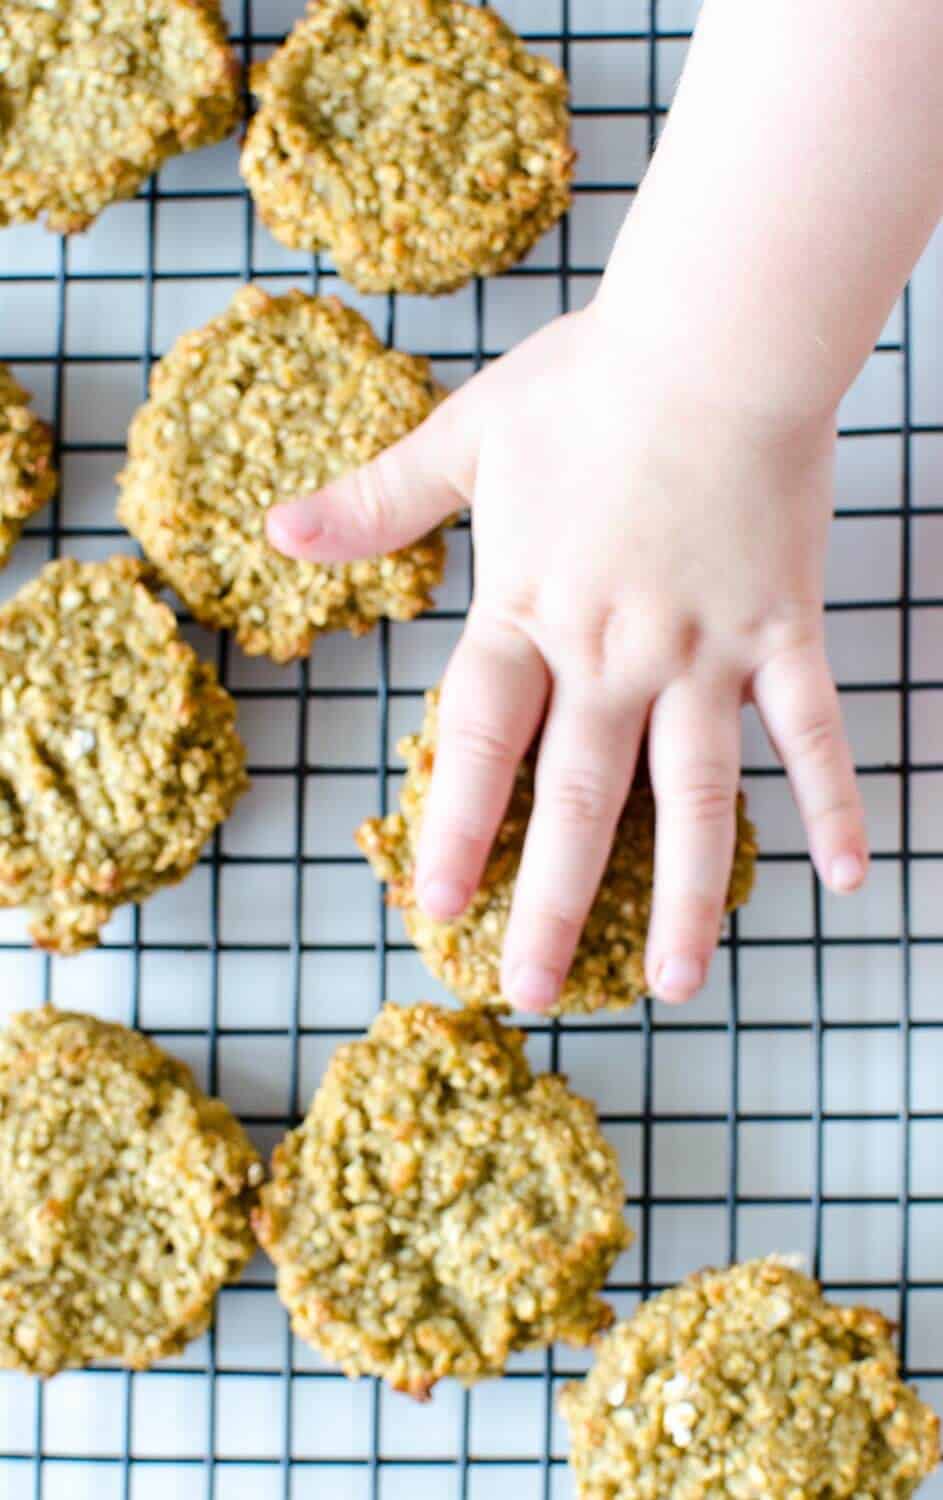 A childs hand reaching for oatmeal cookies cooling on a wire rack.